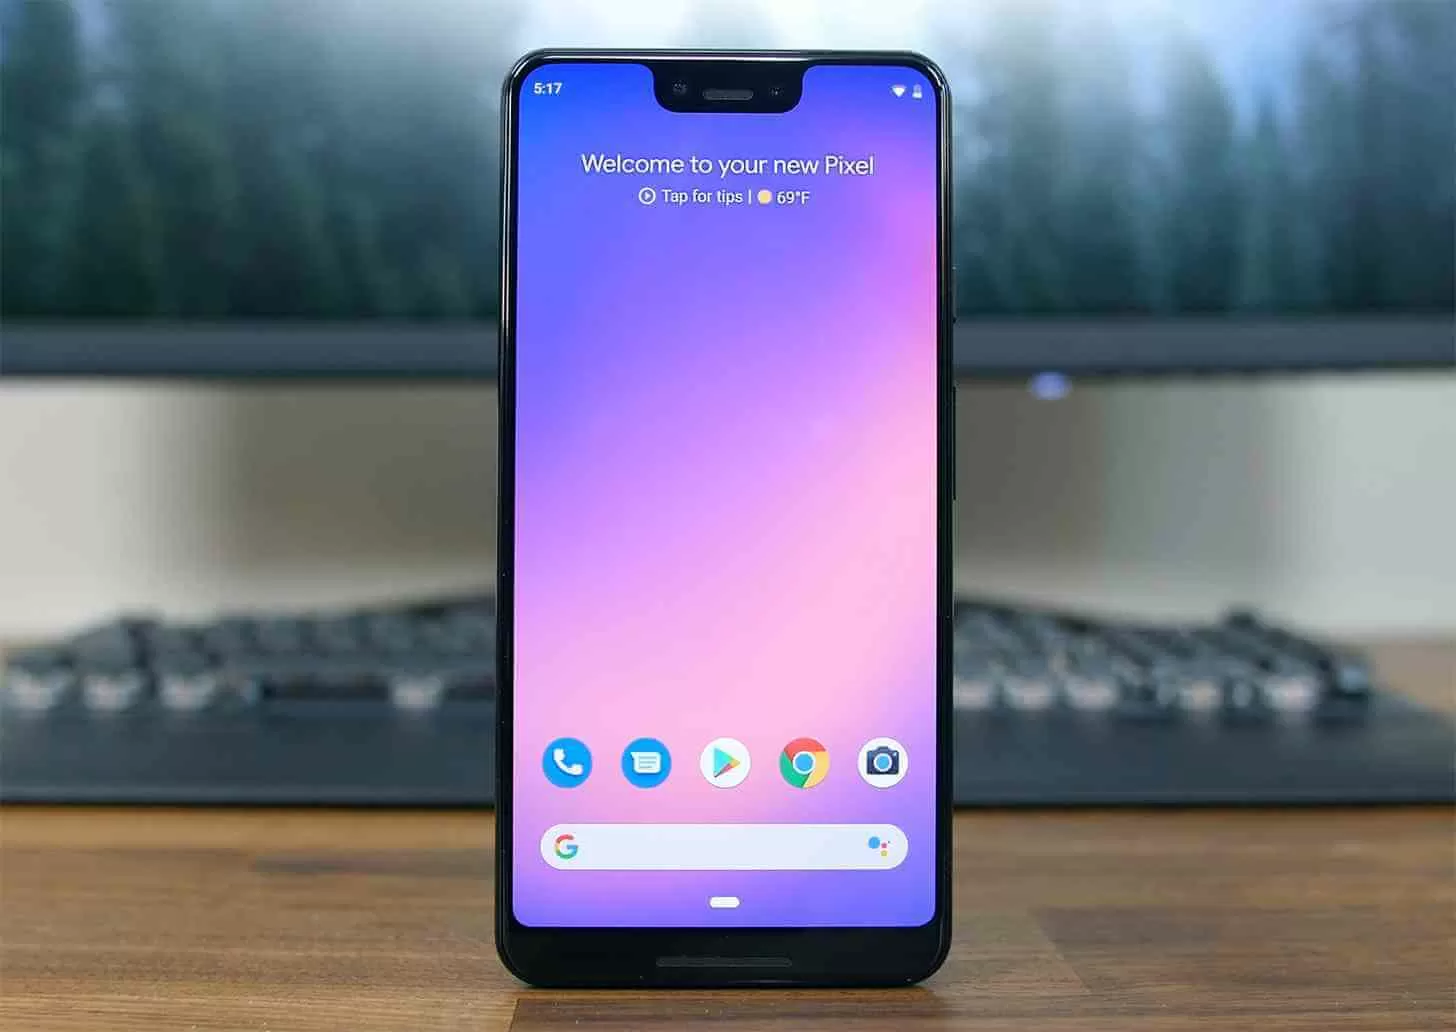 Android 10 reportedly arriving on Pixel devices next week